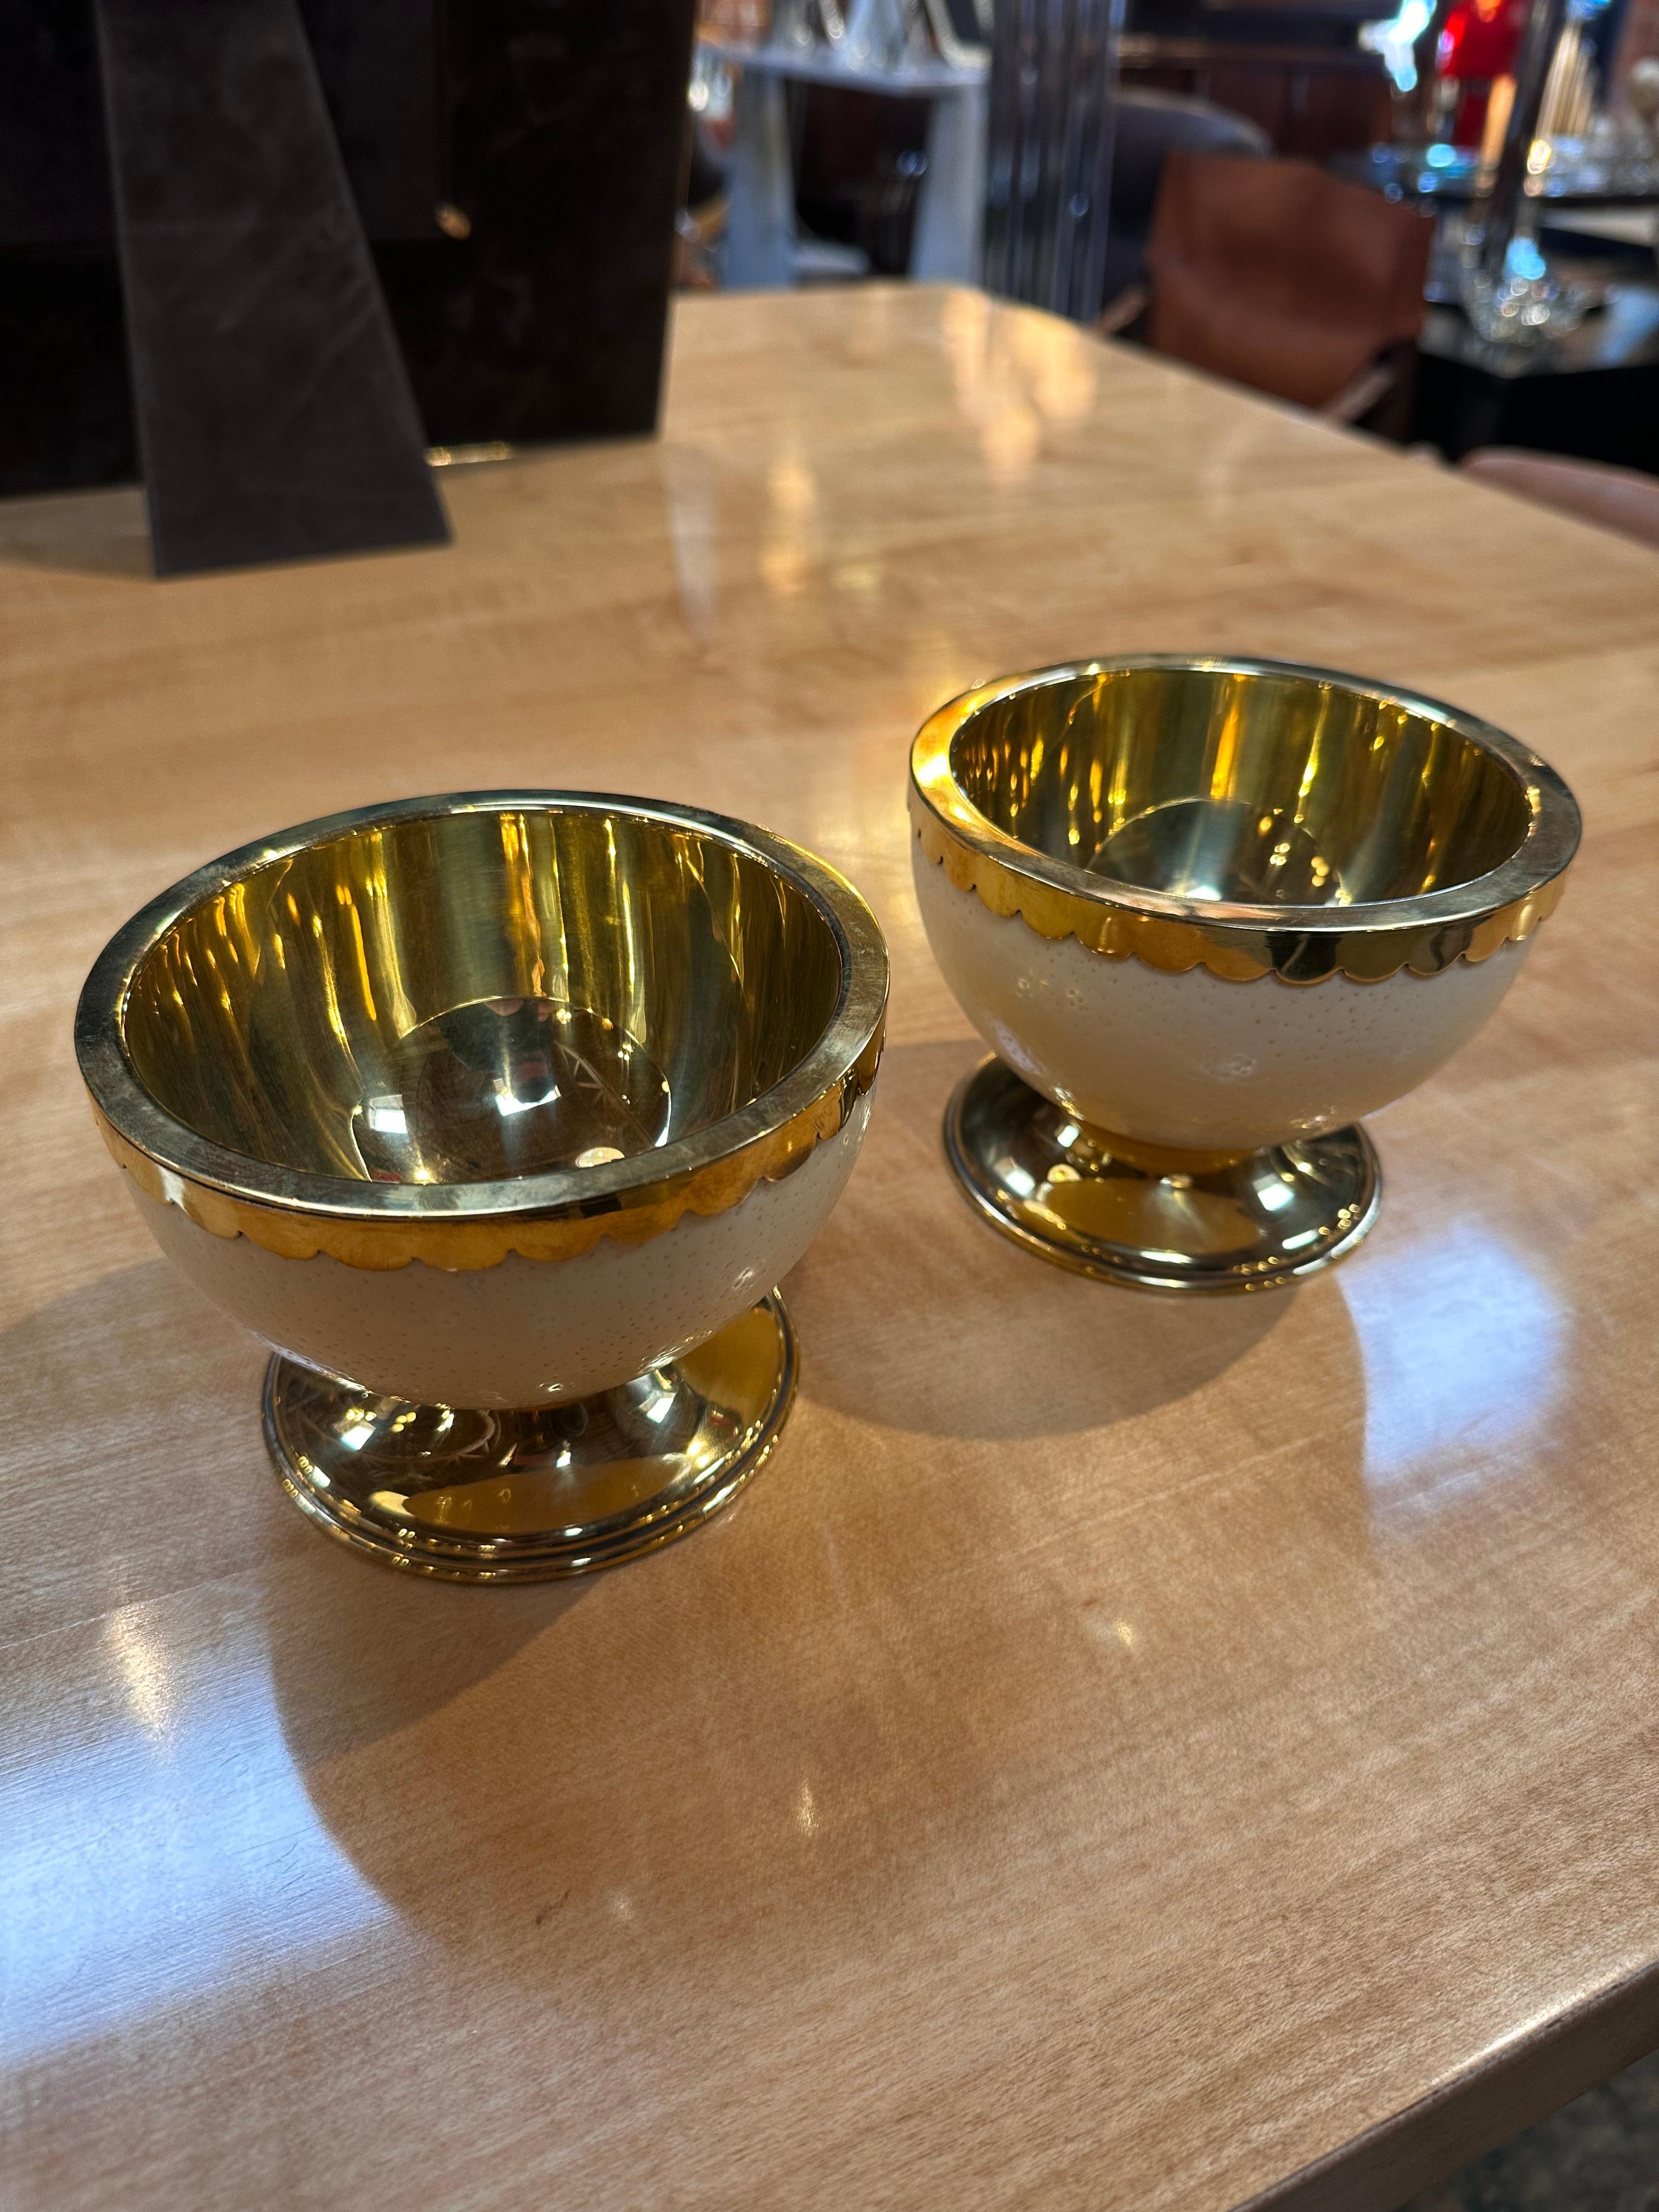 The Pair of 2 Unique Christian Dior Decorative Bowls is an exquisite and stylish set. Crafted by Christian Dior, these bowls showcase exceptional design and quality. The unique detailing and branding reflect the luxury and sophistication associated